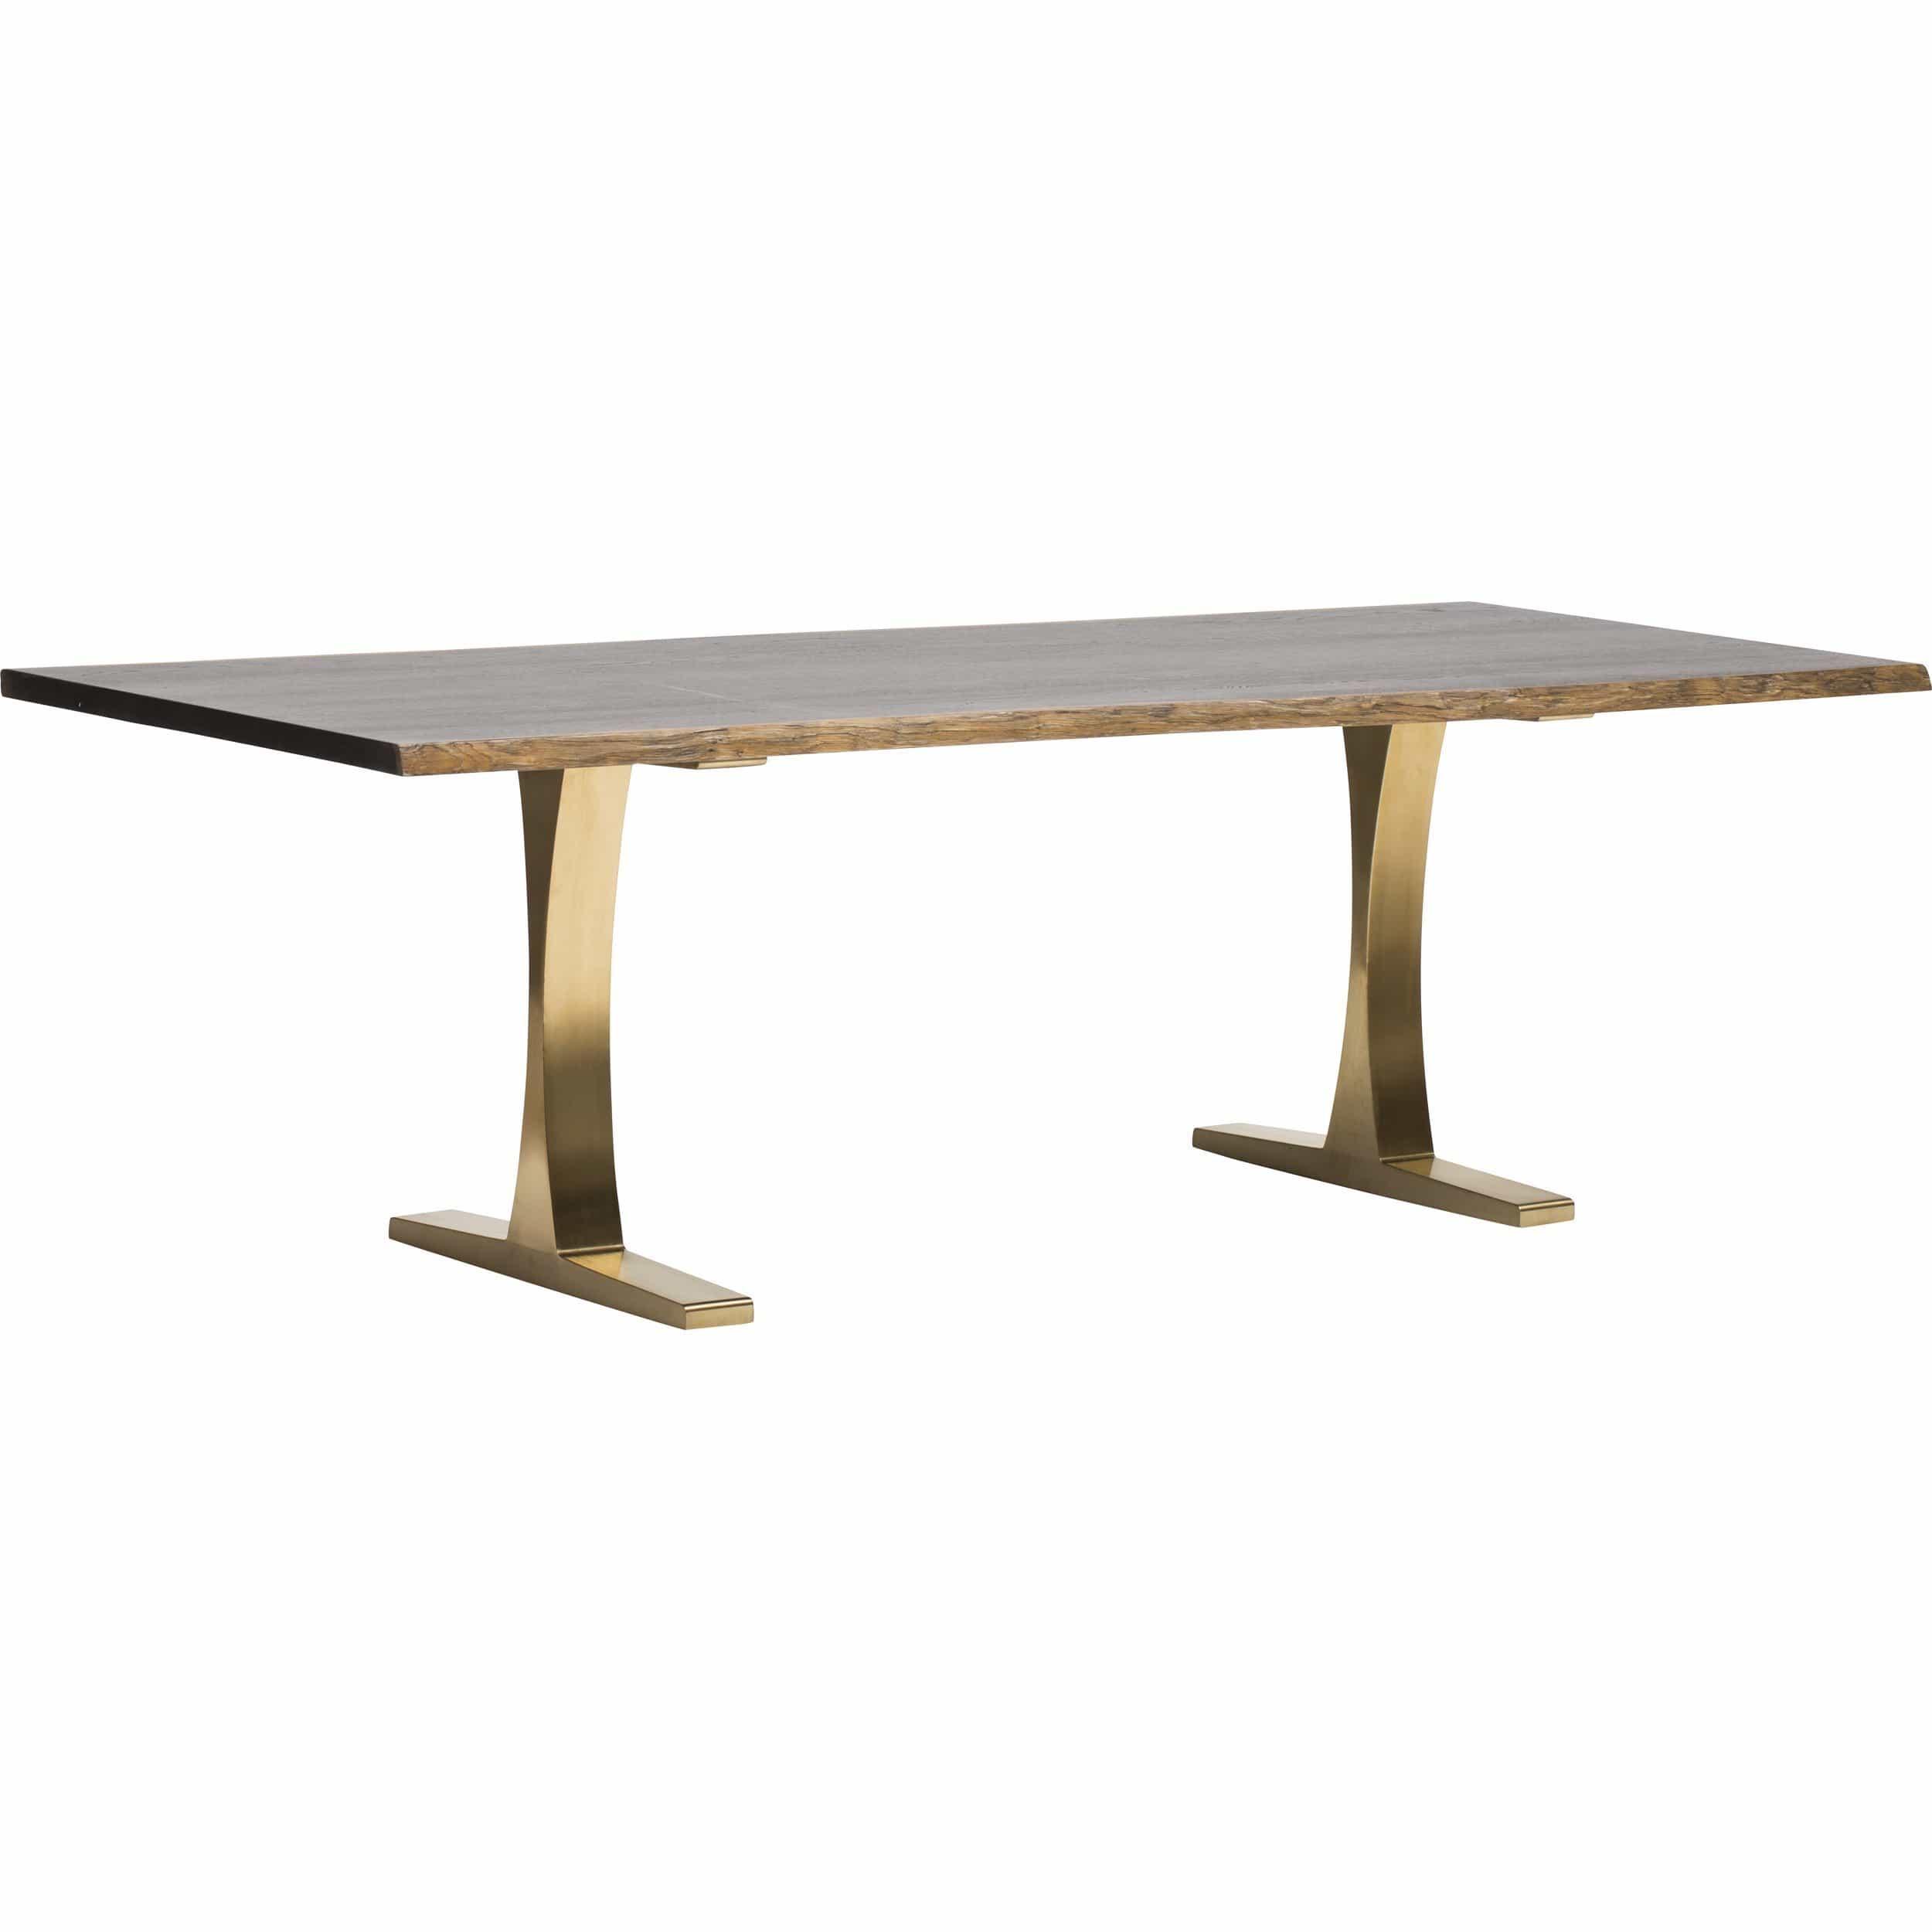 Image of Toulouse Dining Table, Seared Oak/Brushed Gold Base